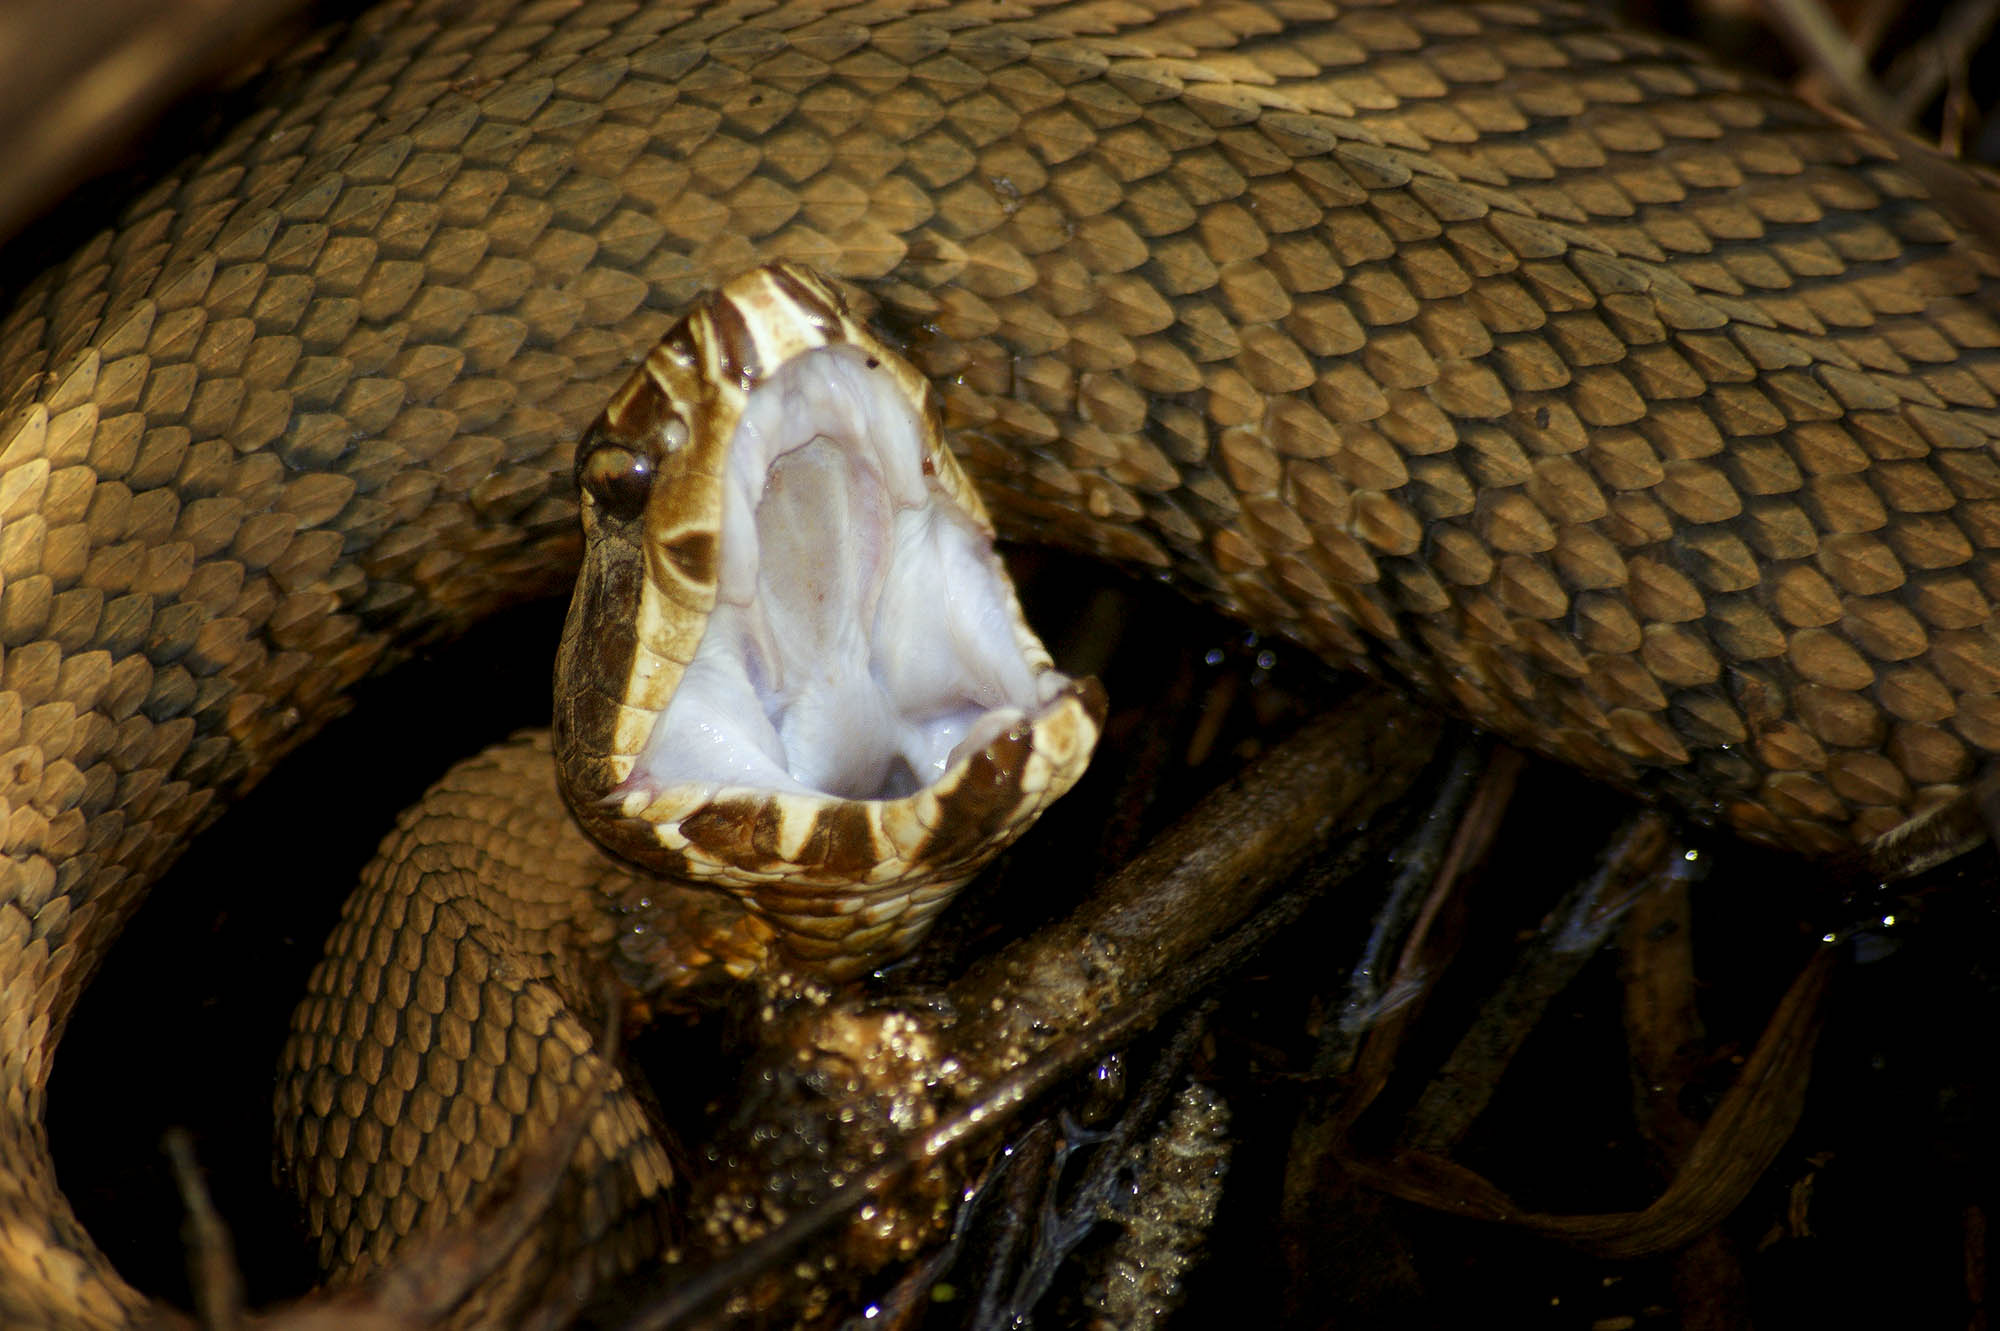 Cottonmouth up close with his white mouth open